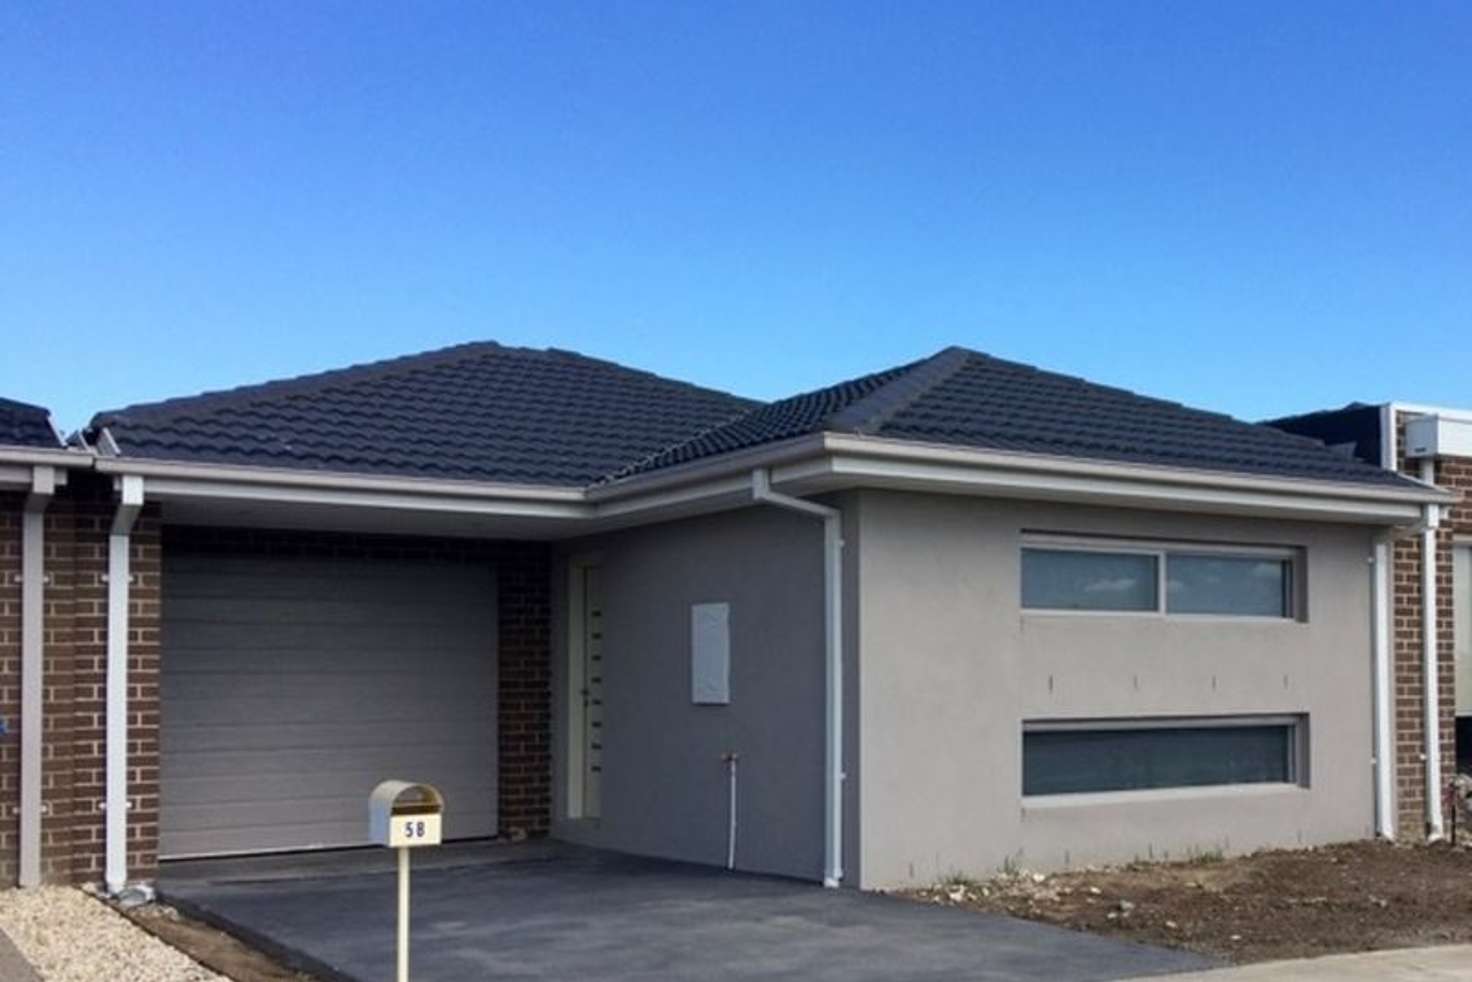 Main view of Homely house listing, 58 Bona Vista Rise, Clyde VIC 3978